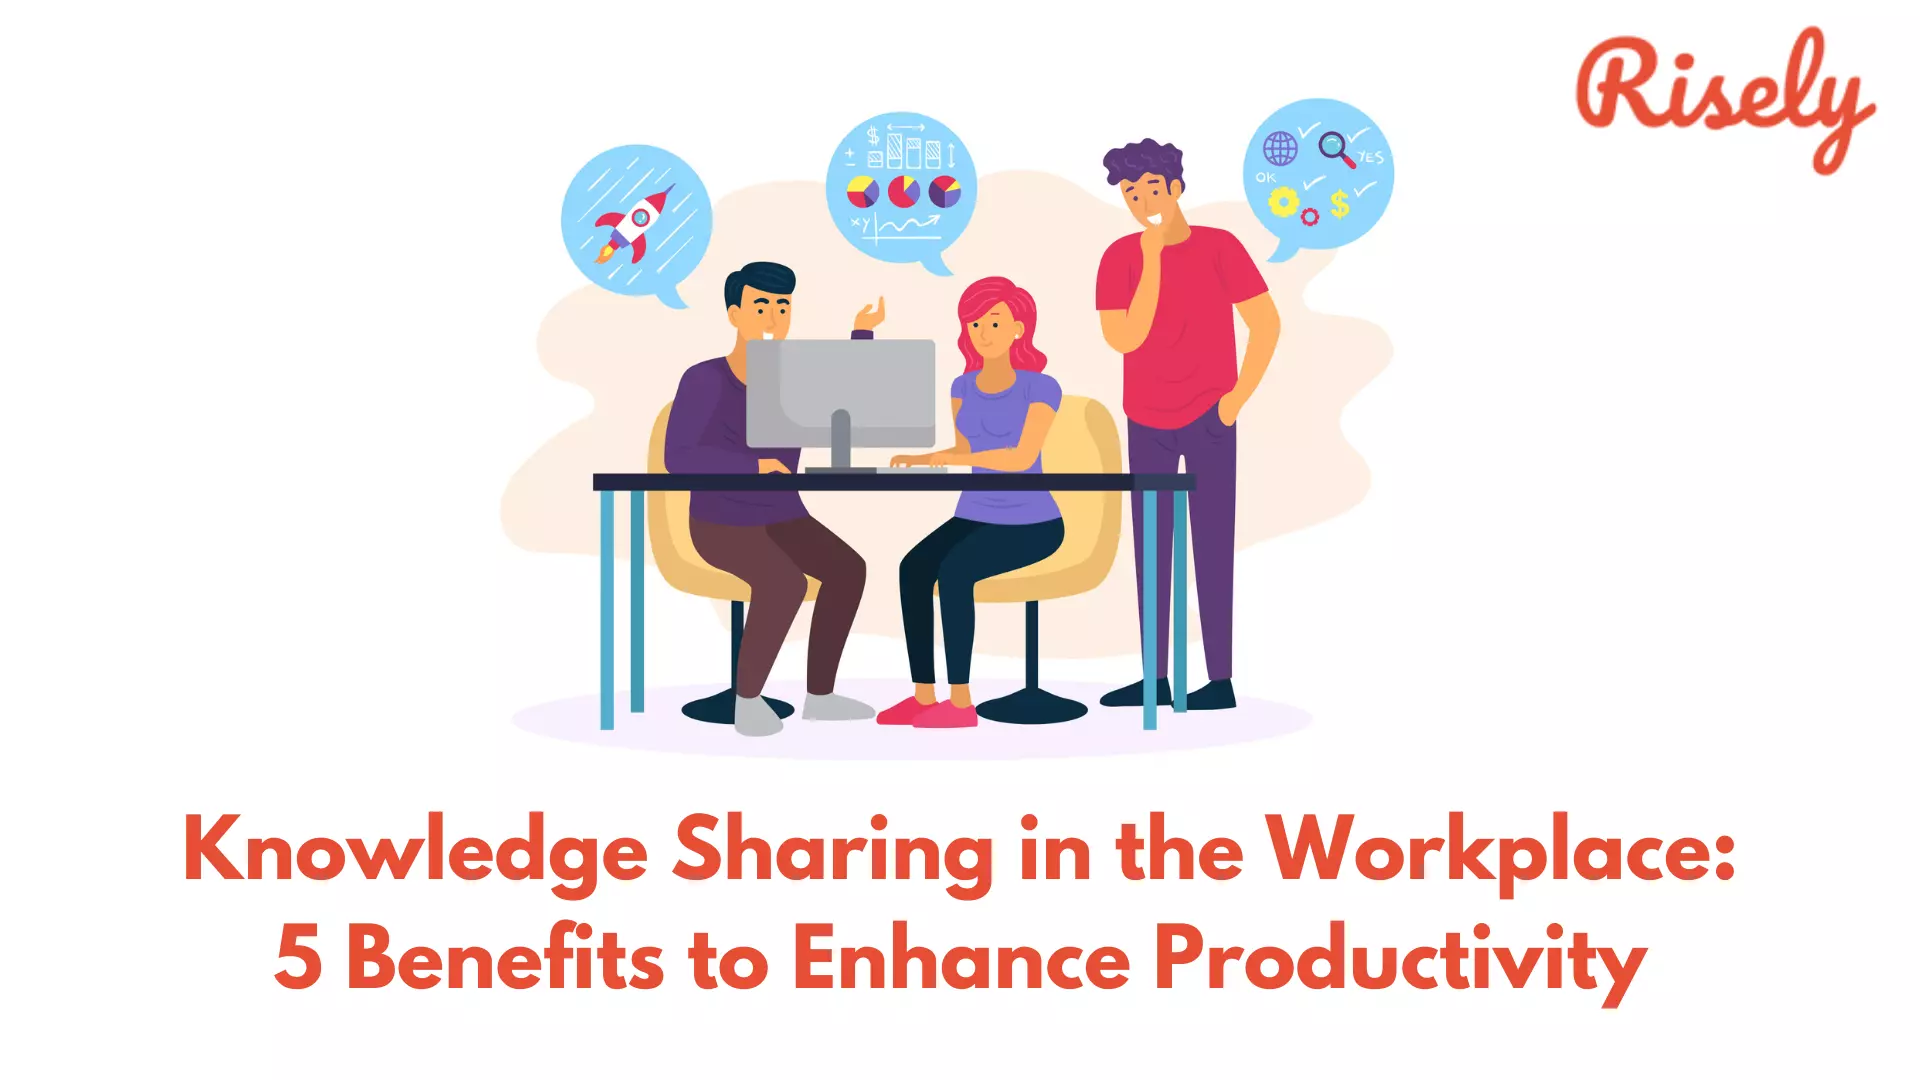 Knowledge Sharing in the Workplace: 5 Benefits to Enhance Productivity